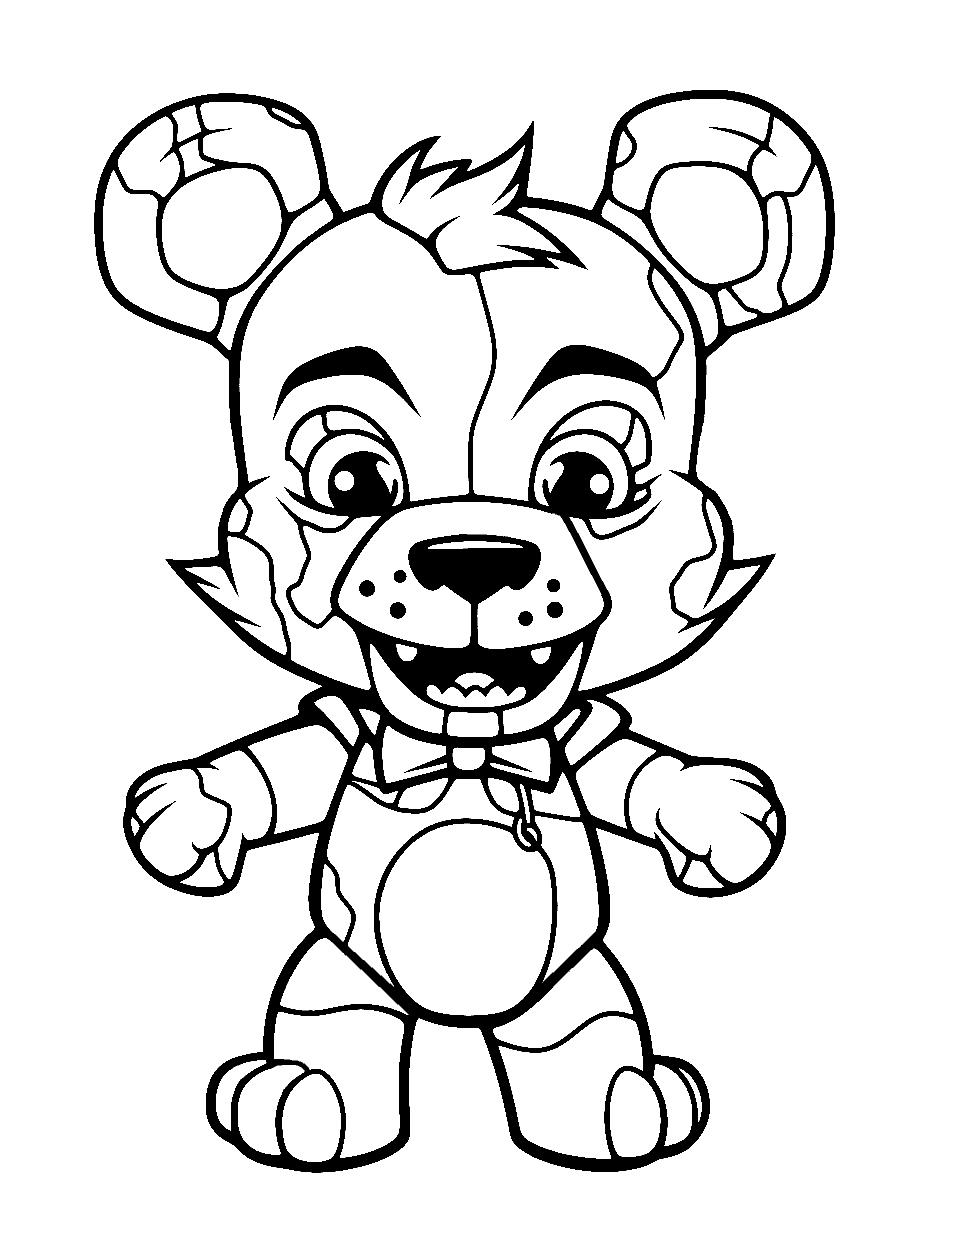 Chibi Freddy’s Fun Five Nights at Freddys Coloring Page - Freddy, in chibi form looking like a toy.